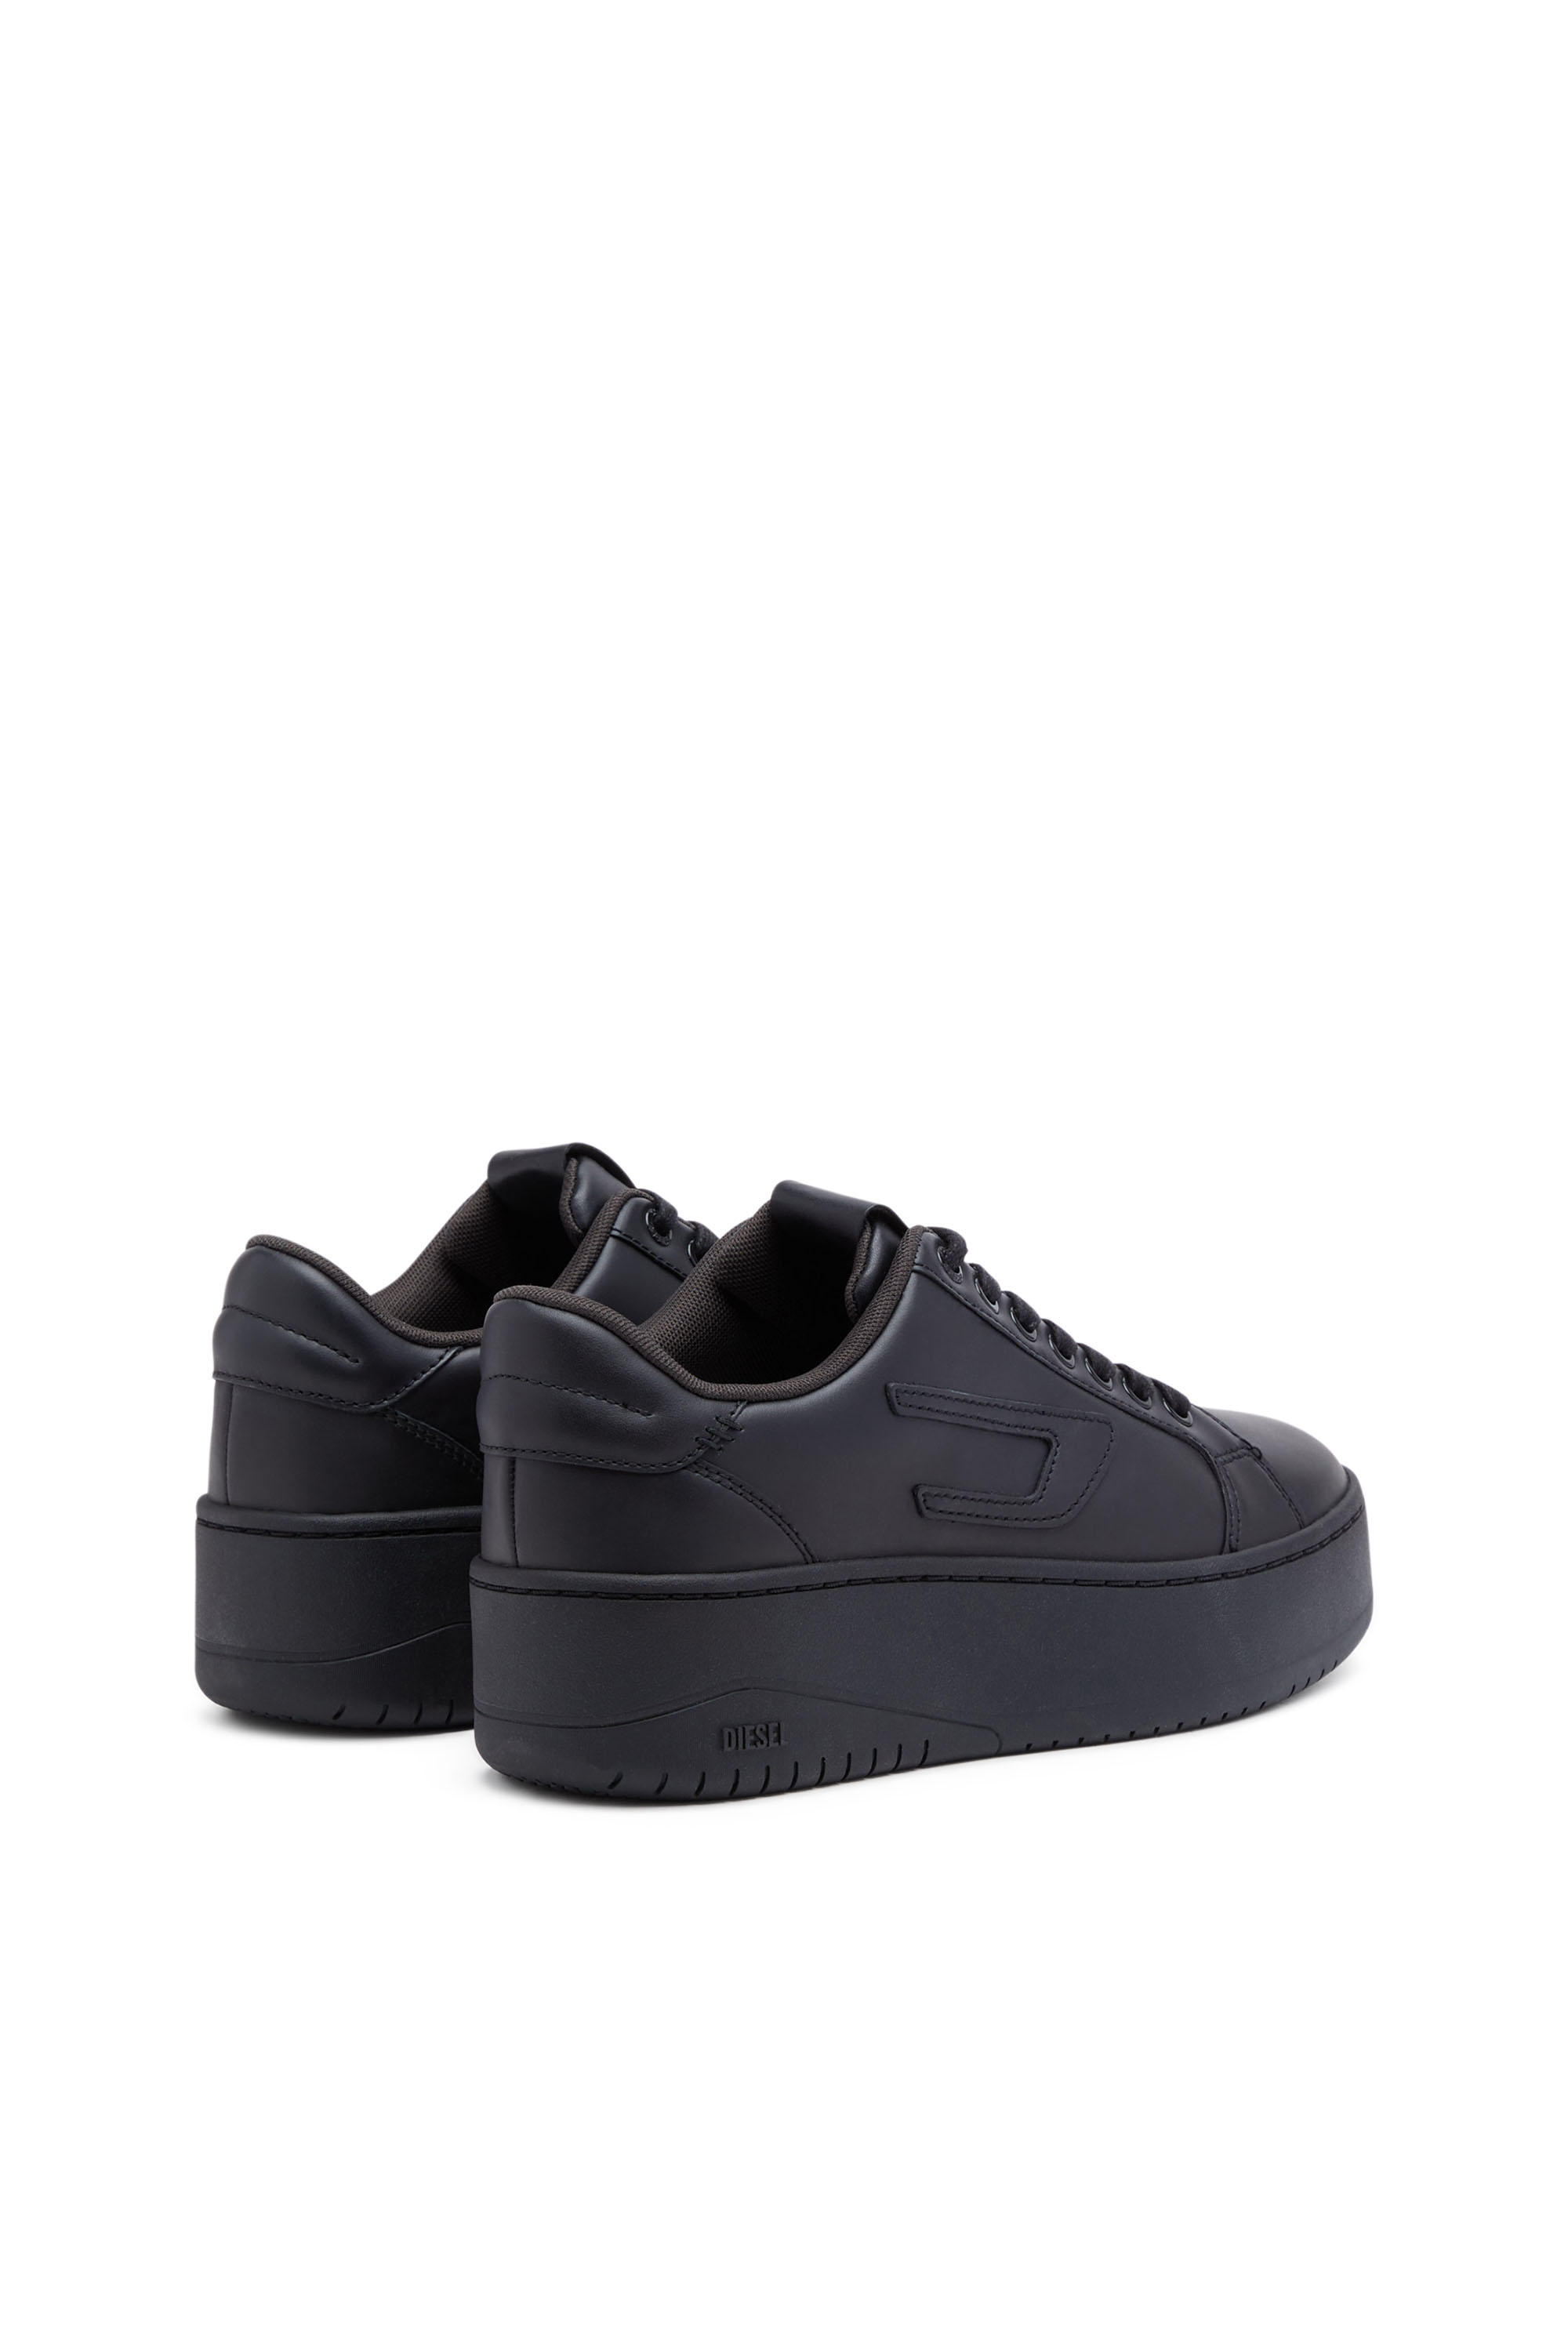 Diesel - S-ATHENE BOLD X, Woman S-Athene Bold-Flatform sneakers in leather in Black - Image 3